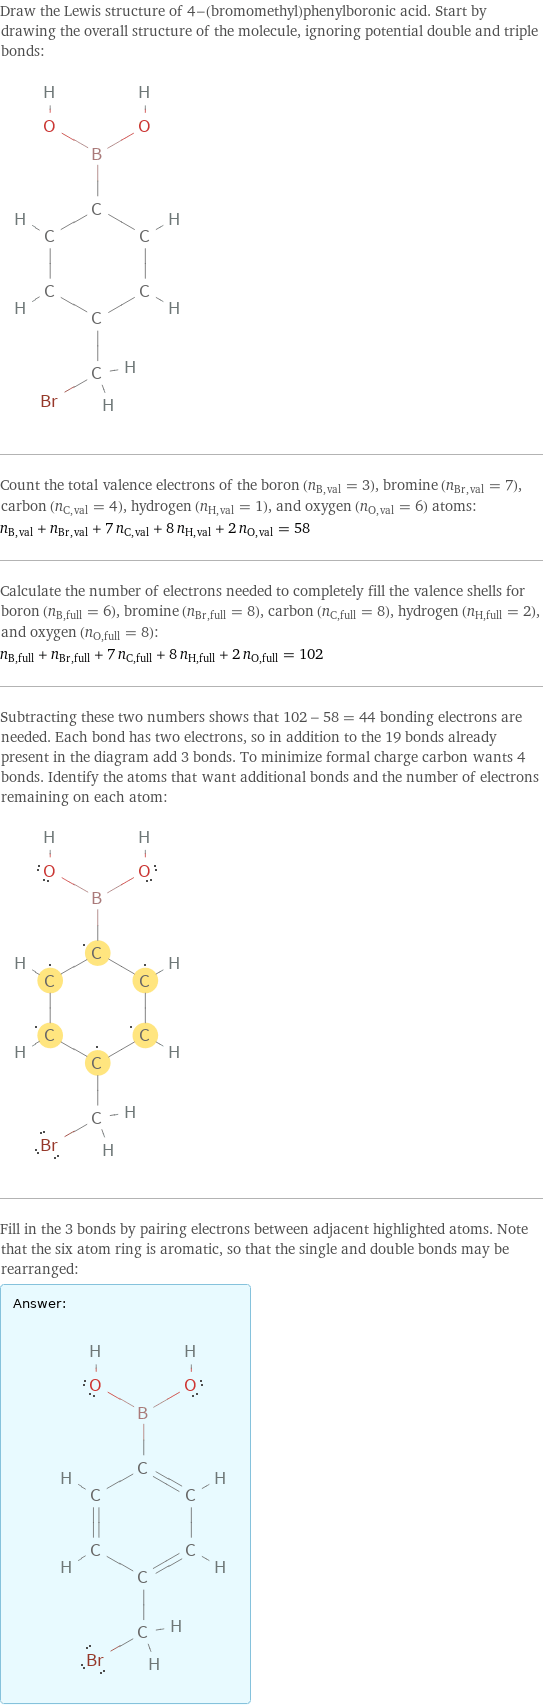 Draw the Lewis structure of 4-(bromomethyl)phenylboronic acid. Start by drawing the overall structure of the molecule, ignoring potential double and triple bonds:  Count the total valence electrons of the boron (n_B, val = 3), bromine (n_Br, val = 7), carbon (n_C, val = 4), hydrogen (n_H, val = 1), and oxygen (n_O, val = 6) atoms: n_B, val + n_Br, val + 7 n_C, val + 8 n_H, val + 2 n_O, val = 58 Calculate the number of electrons needed to completely fill the valence shells for boron (n_B, full = 6), bromine (n_Br, full = 8), carbon (n_C, full = 8), hydrogen (n_H, full = 2), and oxygen (n_O, full = 8): n_B, full + n_Br, full + 7 n_C, full + 8 n_H, full + 2 n_O, full = 102 Subtracting these two numbers shows that 102 - 58 = 44 bonding electrons are needed. Each bond has two electrons, so in addition to the 19 bonds already present in the diagram add 3 bonds. To minimize formal charge carbon wants 4 bonds. Identify the atoms that want additional bonds and the number of electrons remaining on each atom:  Fill in the 3 bonds by pairing electrons between adjacent highlighted atoms. Note that the six atom ring is aromatic, so that the single and double bonds may be rearranged: Answer: |   | 